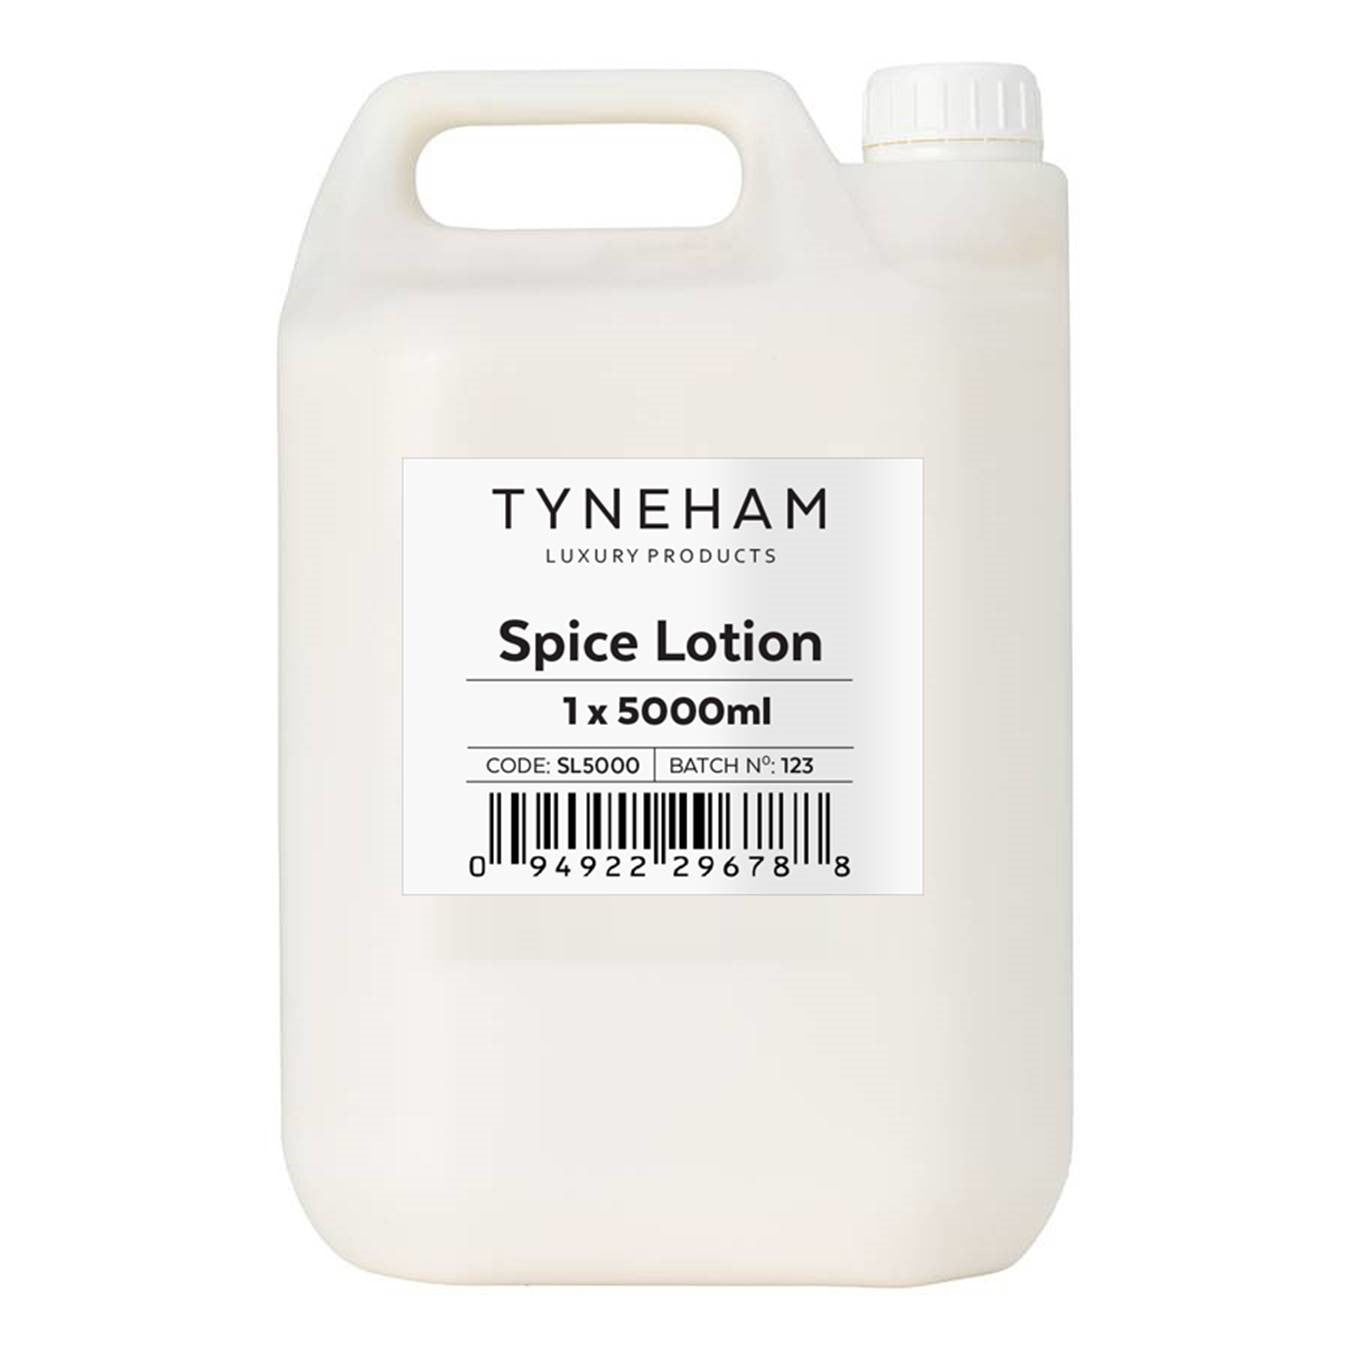 Spice Lotion 5000ml